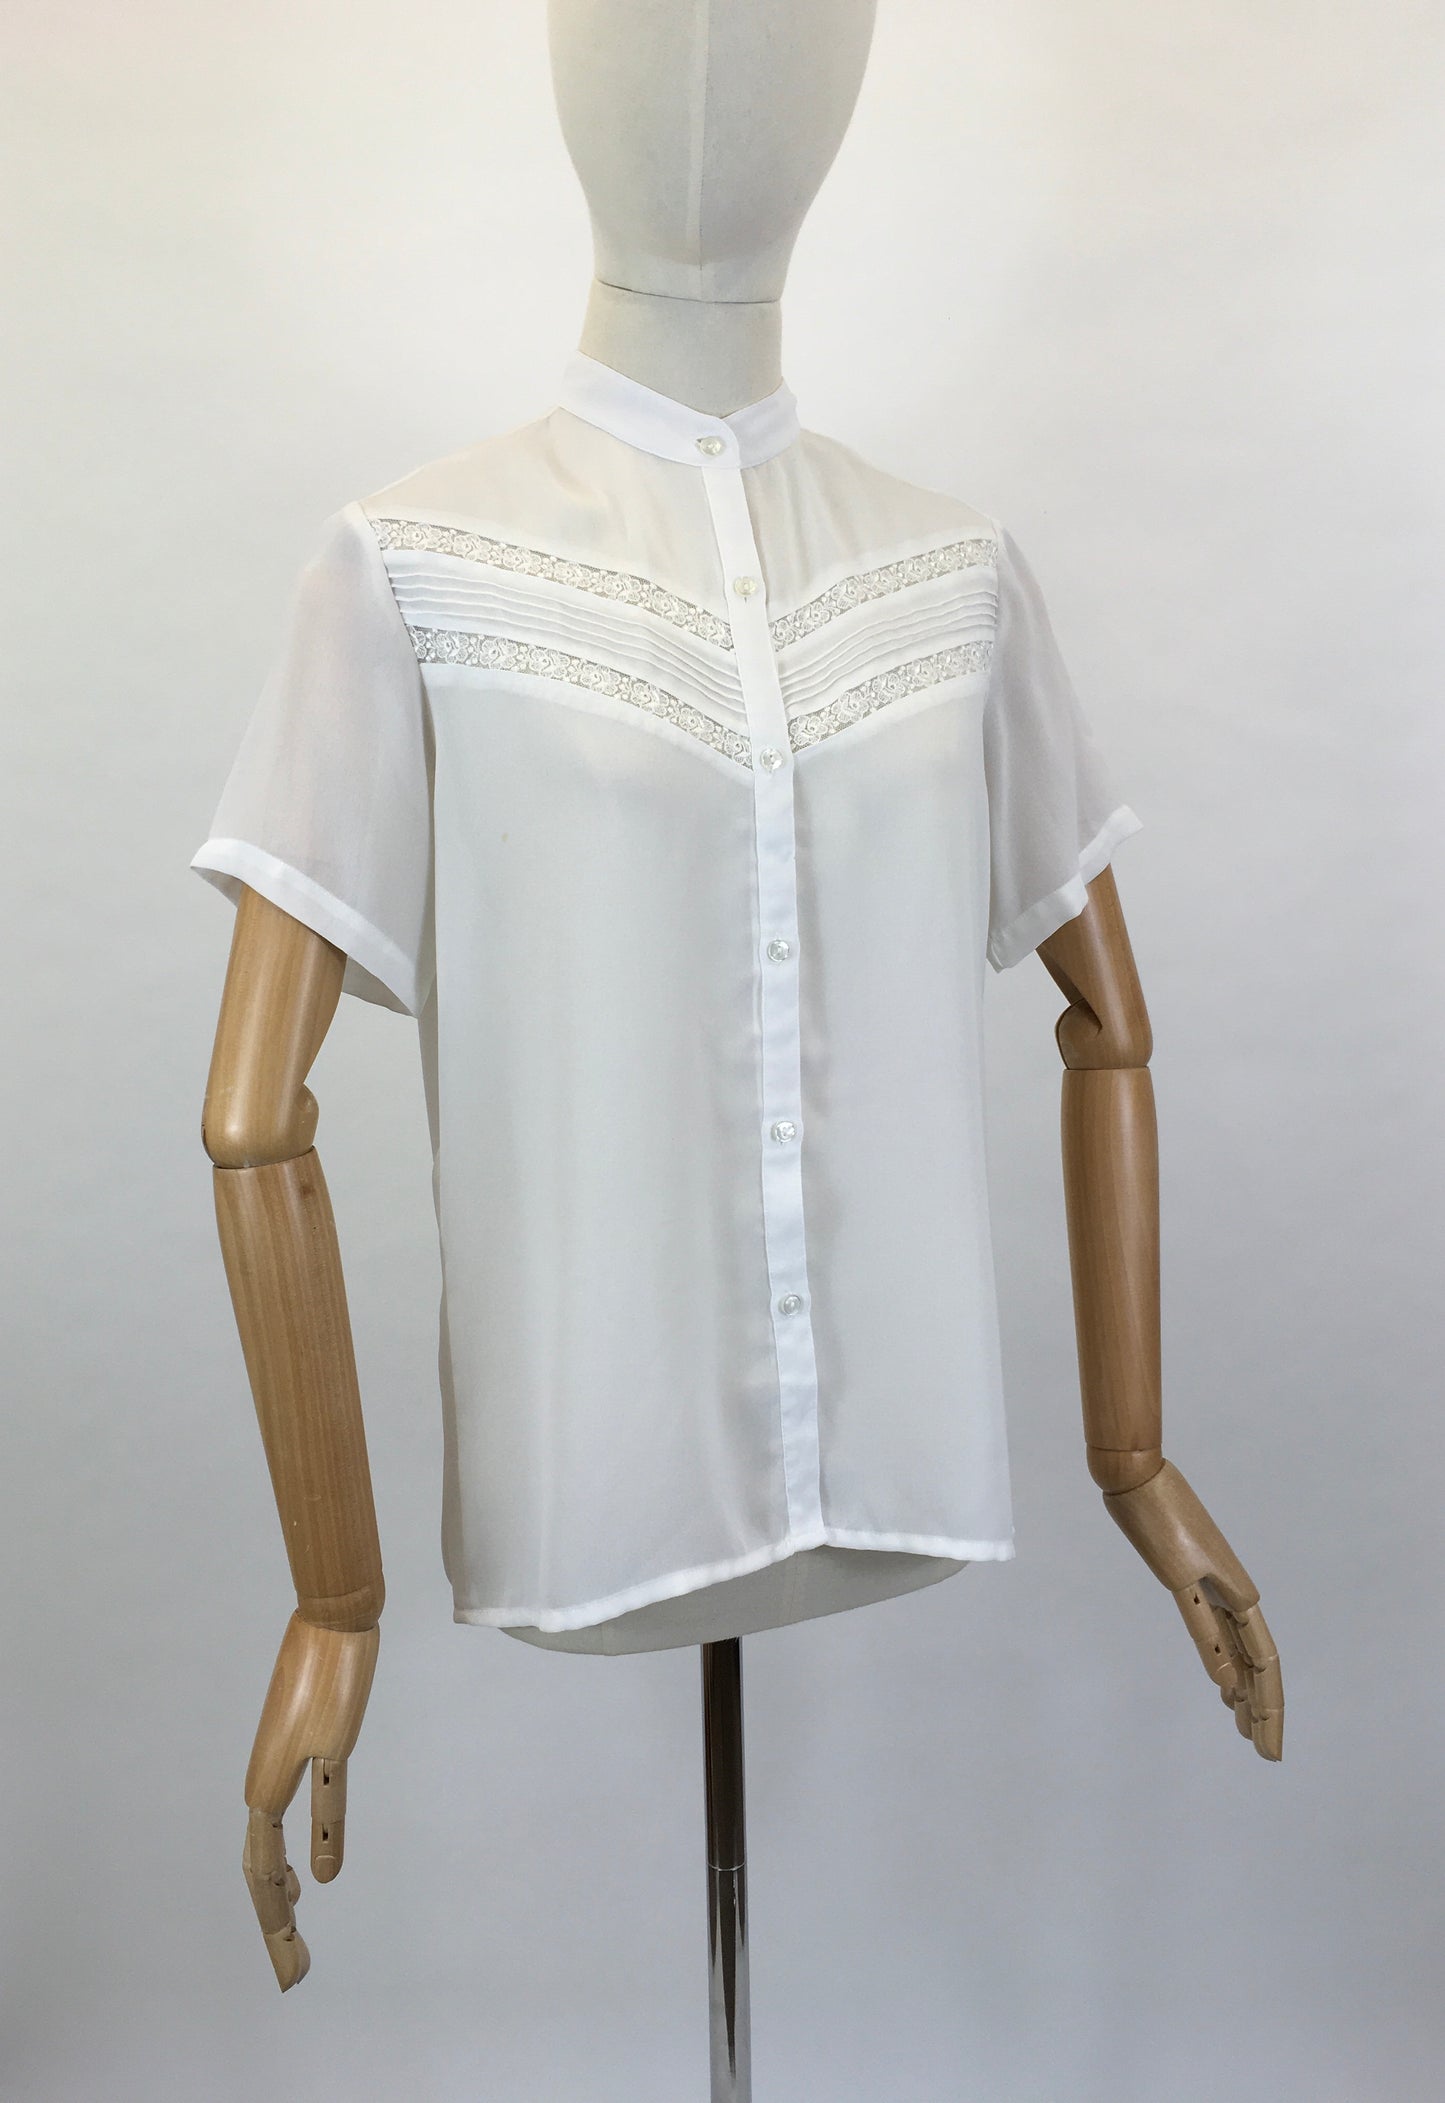 Original 1950’s Darling Sheer Rayon Blouse in White - Pintuck and Lace Detailing